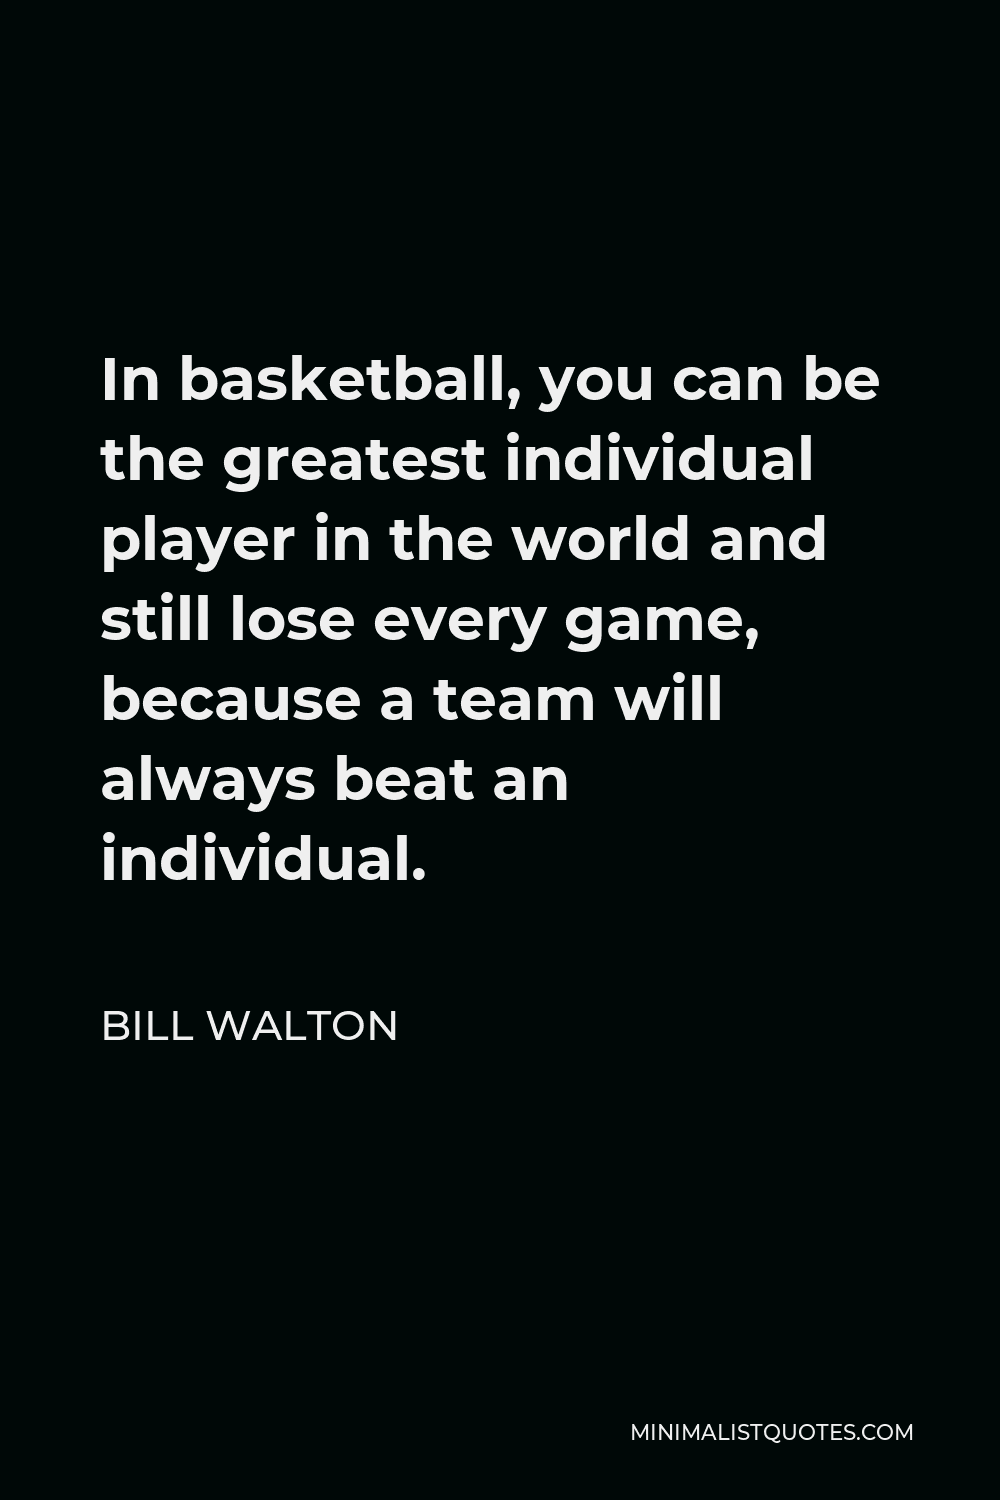 Bill Walton Quote - In basketball, you can be the greatest individual player in the world and still lose every game, because a team will always beat an individual.